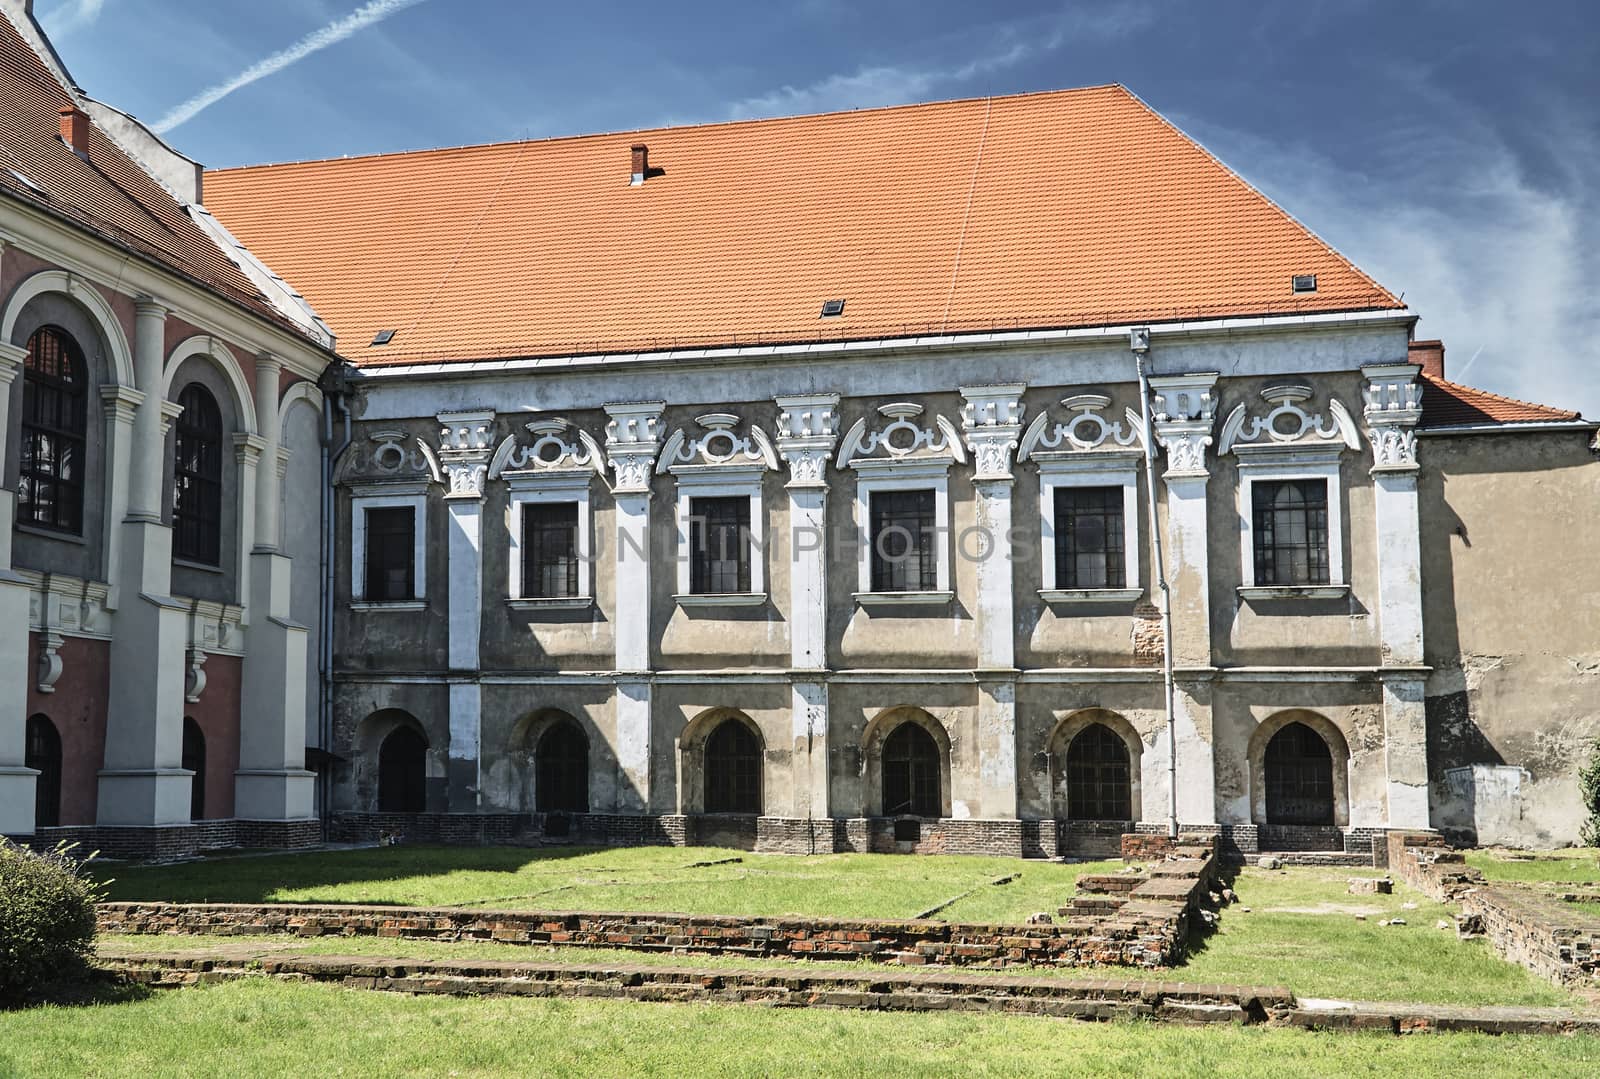 Historic buildings of the church and former monastery in Poznan